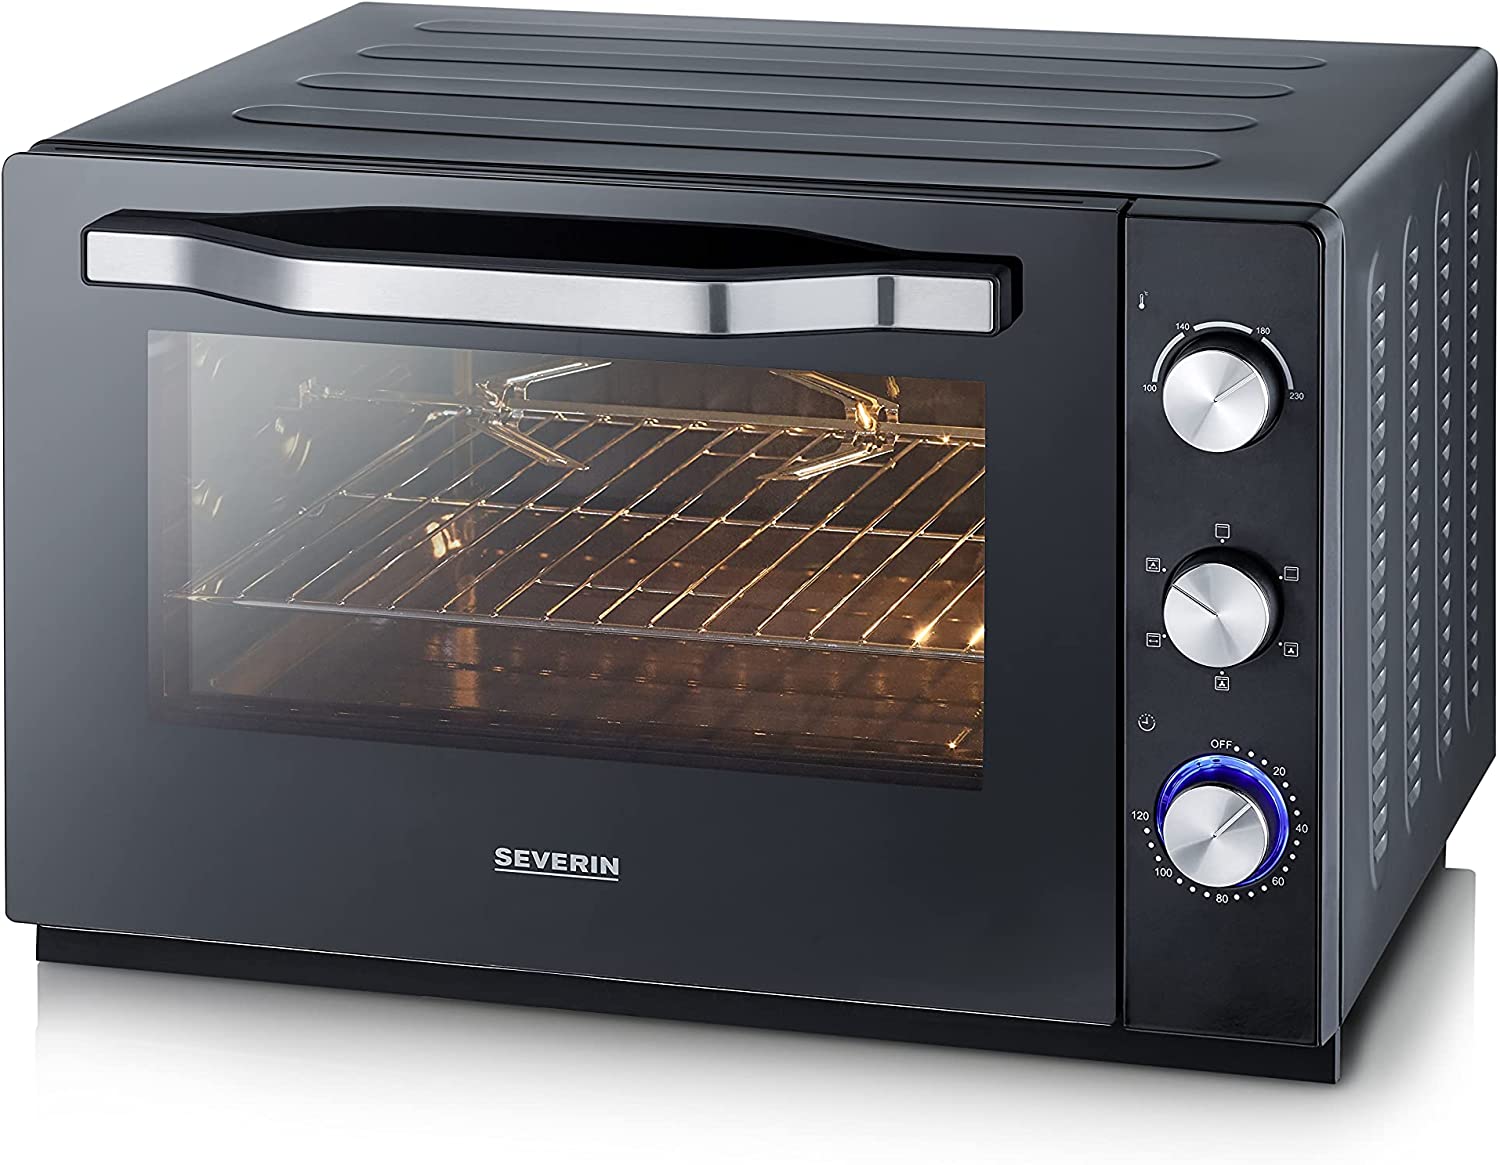 SEVERIN XXL baking and toast oven with convection function, oven with grill rack, baking tray, rotisserie and pizza stone, versatile hot air oven with 60 L capacity, 2,200 W, black, TO 2073